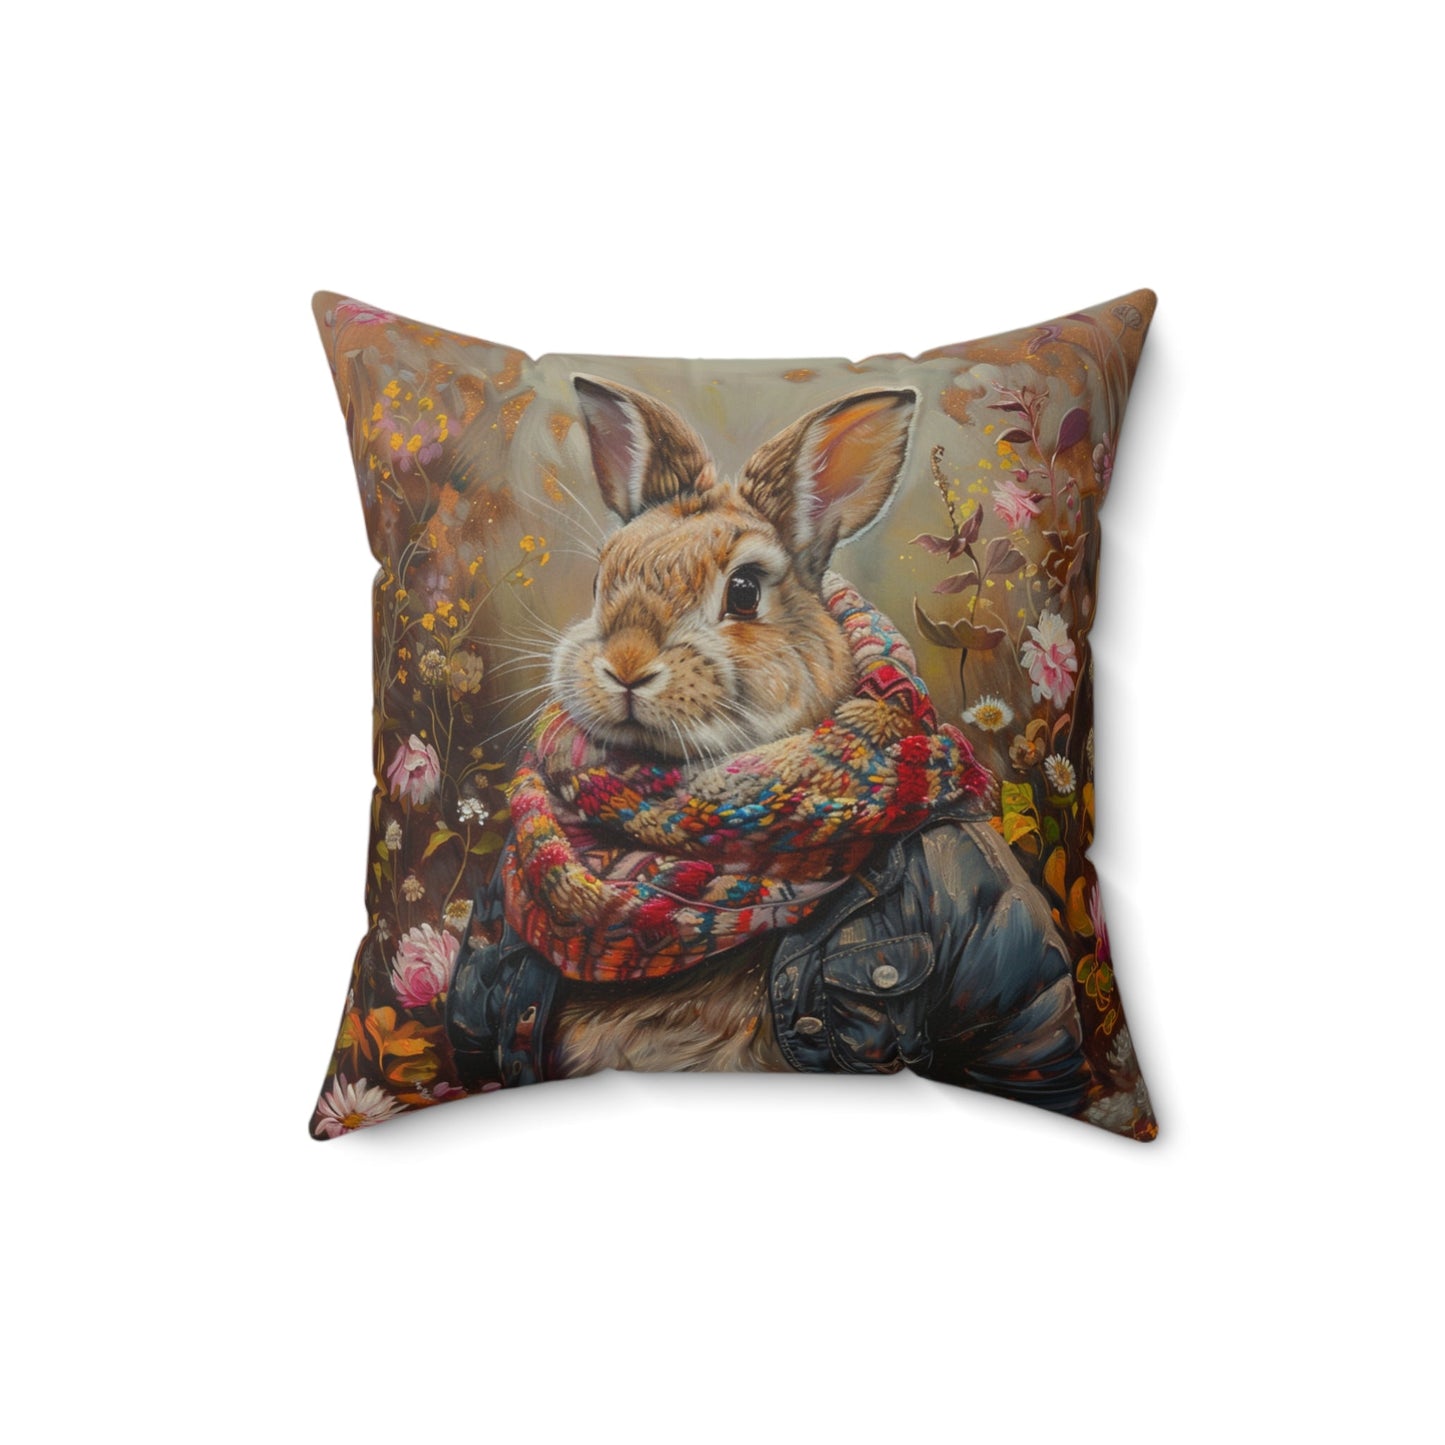 Cute Rabbit with Jacket & Scarf in Wildflowers Pillows - Whimsical, Magical - FlooredByArt